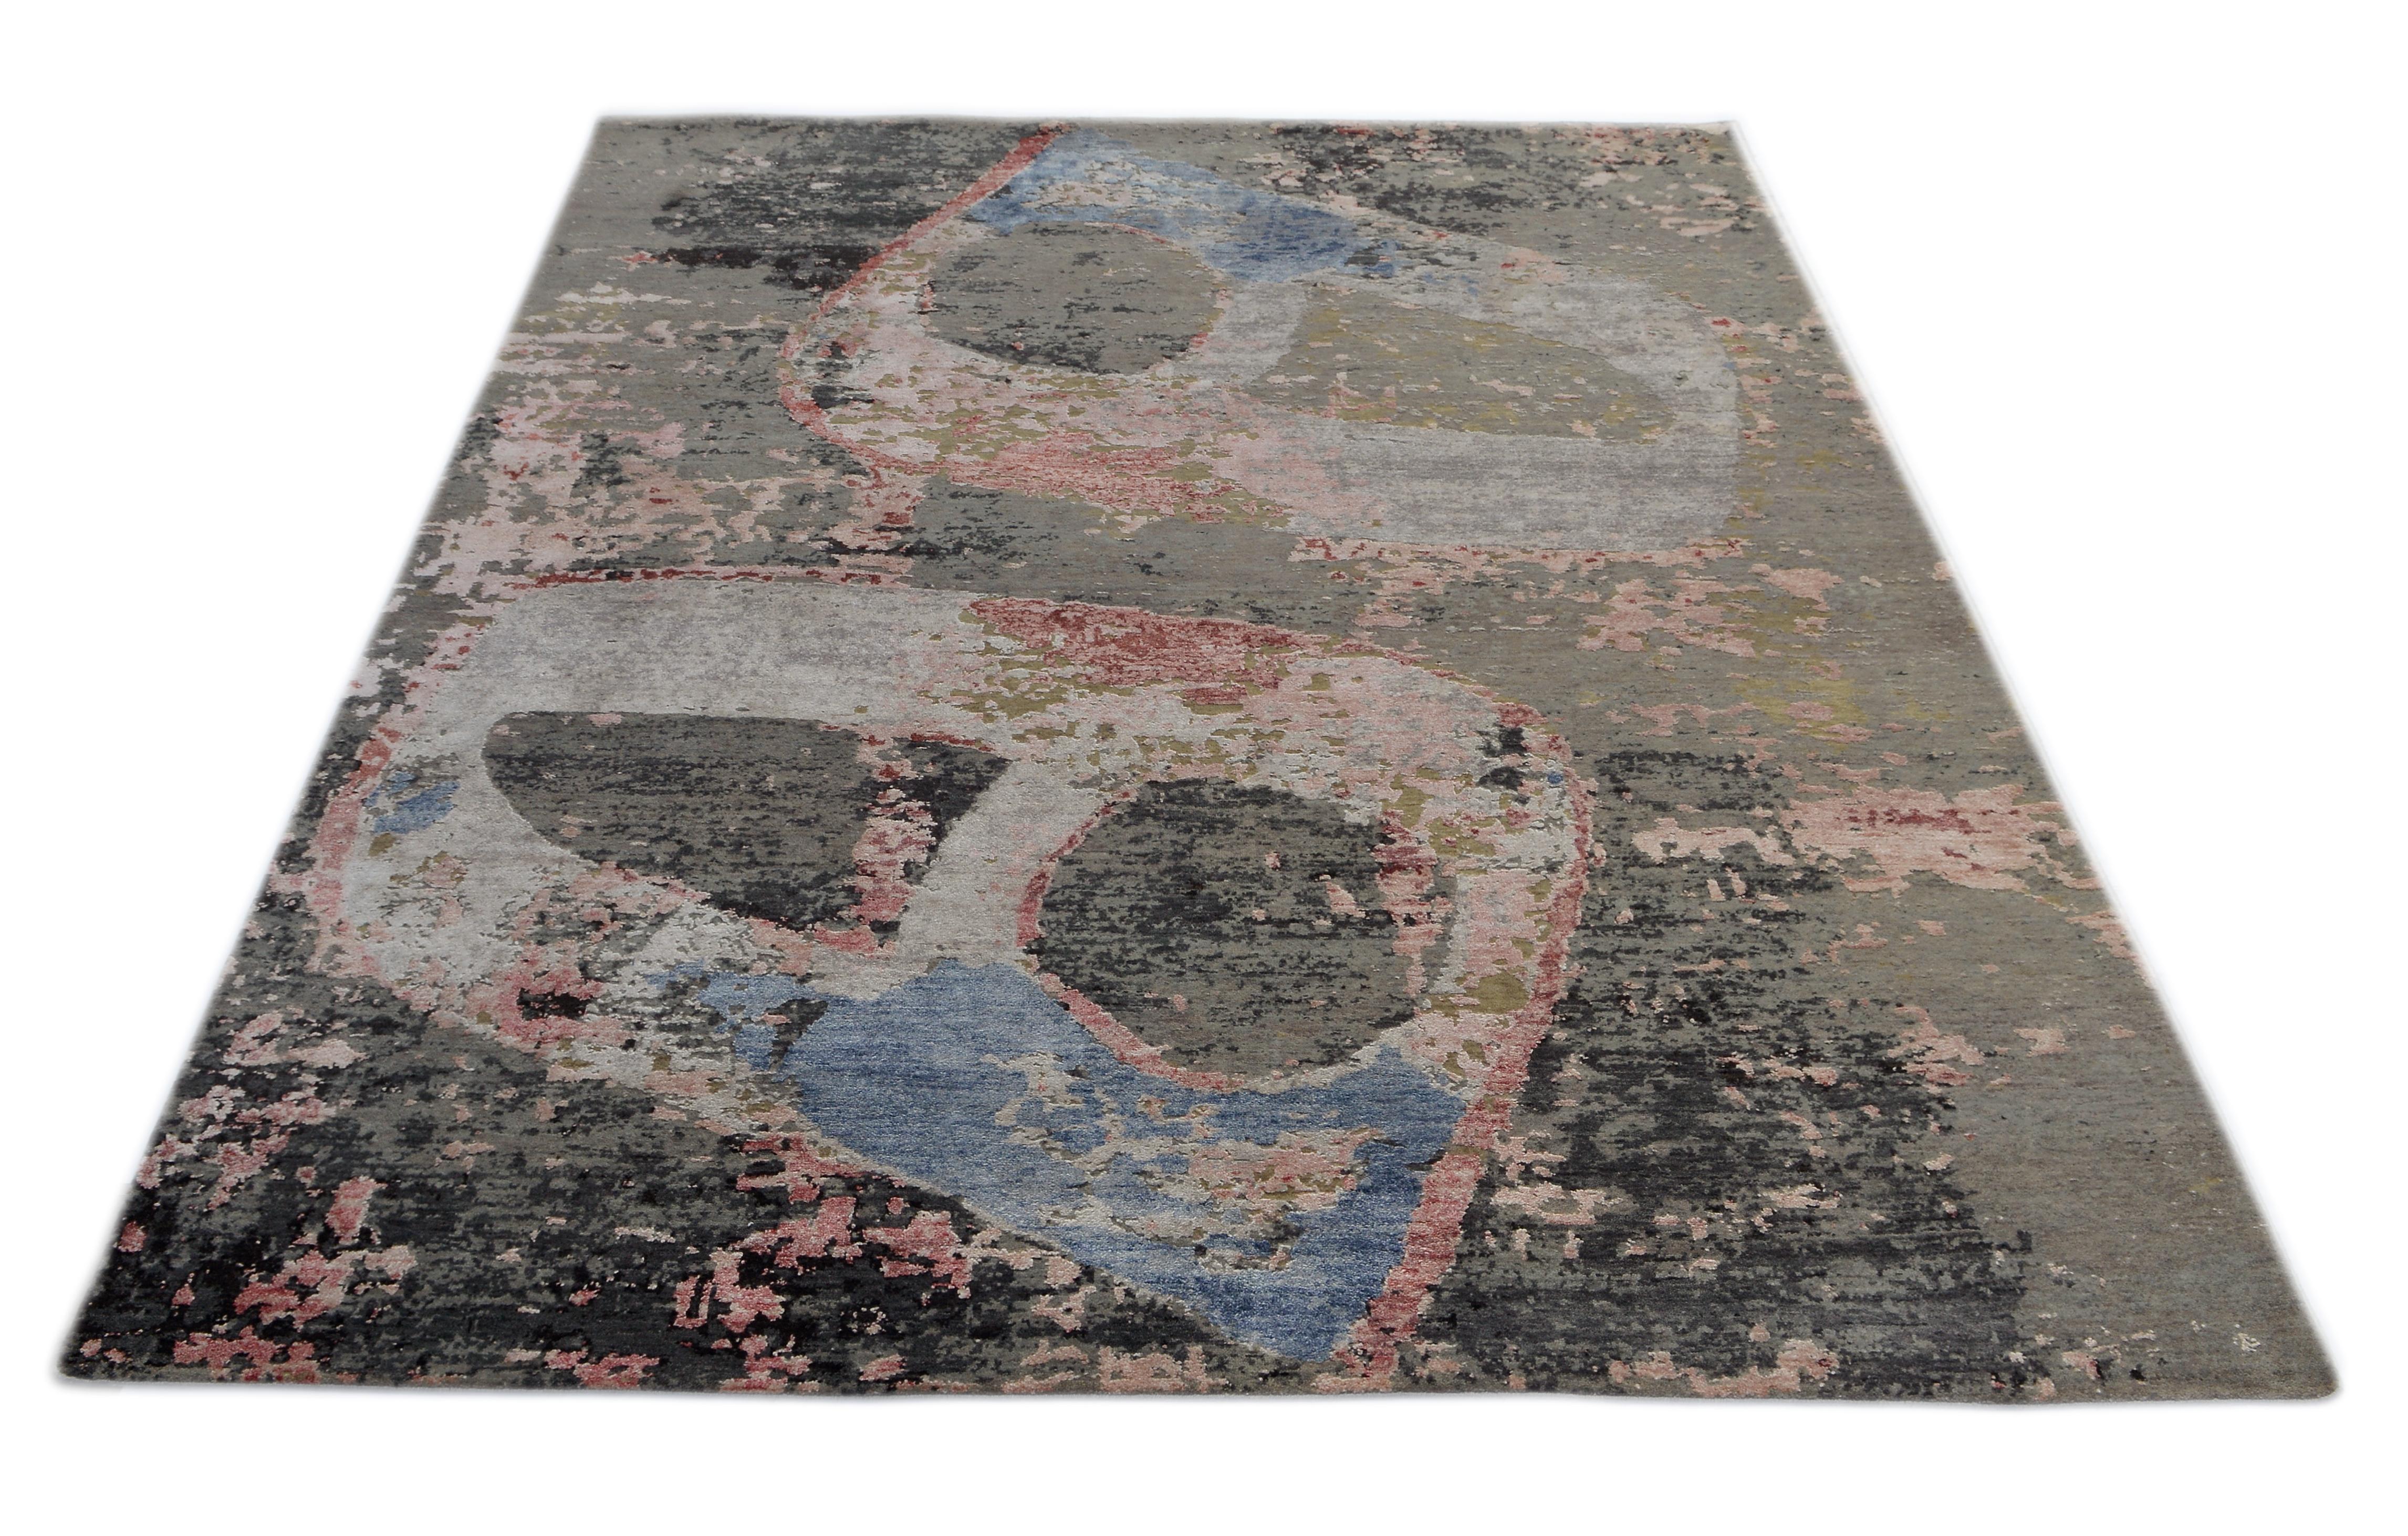 A new addition to the handmade rugs in the abstract rug line by Rug & Kilim, this 6'9” x 10' modern rug is hand knotted in a unique, proprietary blend of quality wool and silk, the natural luster of the latter bringing out modern hues of beige,